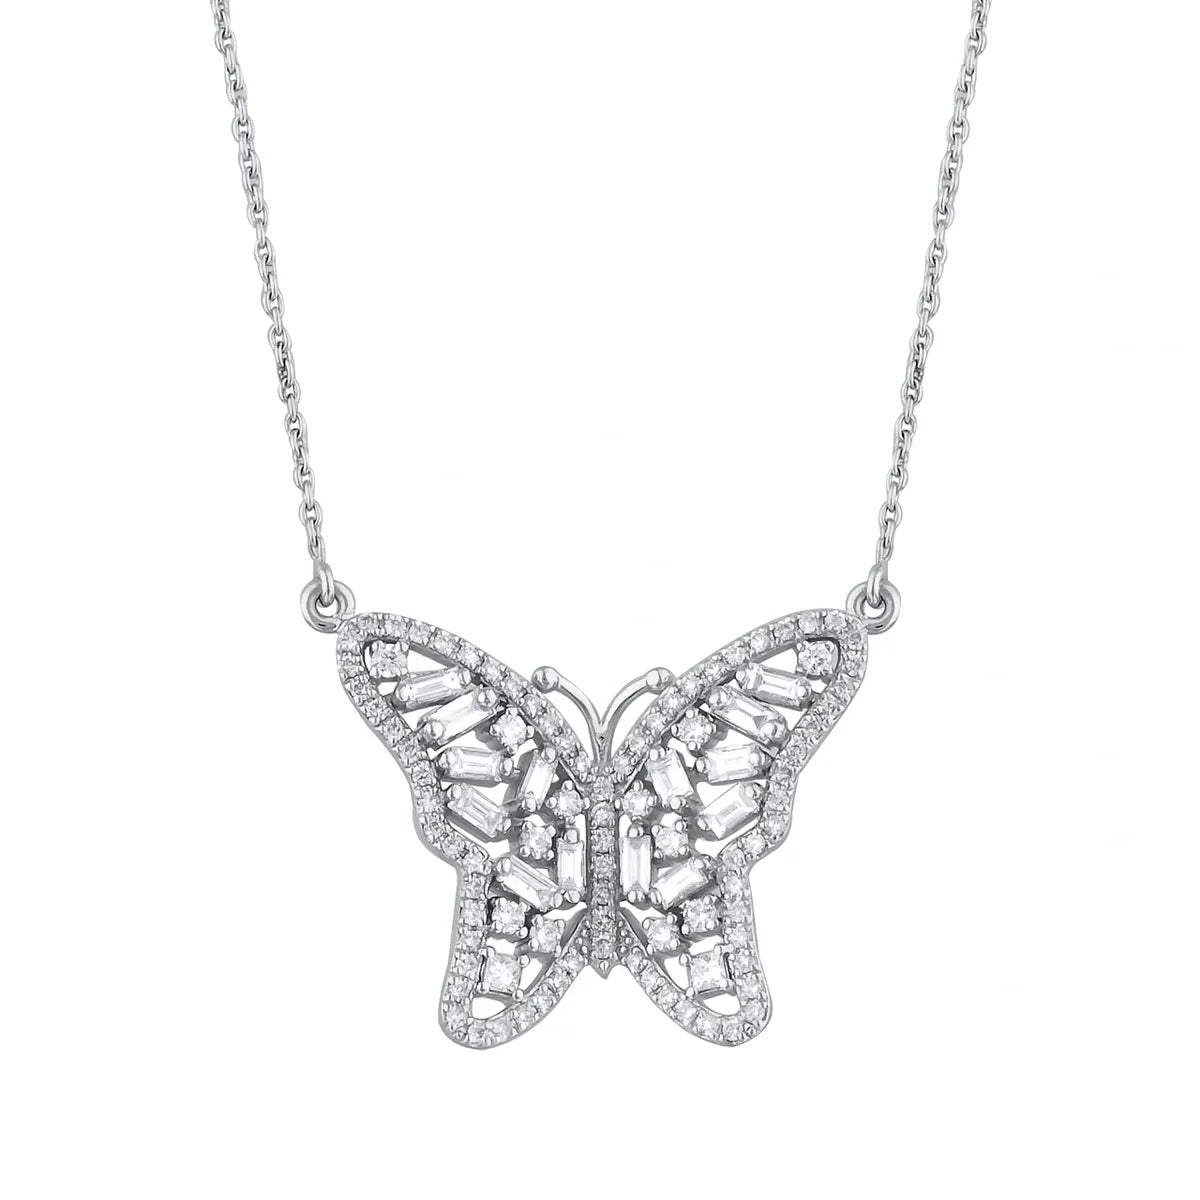 14K White Gold Butterfly Necklace with 1.25 Carat Diamond